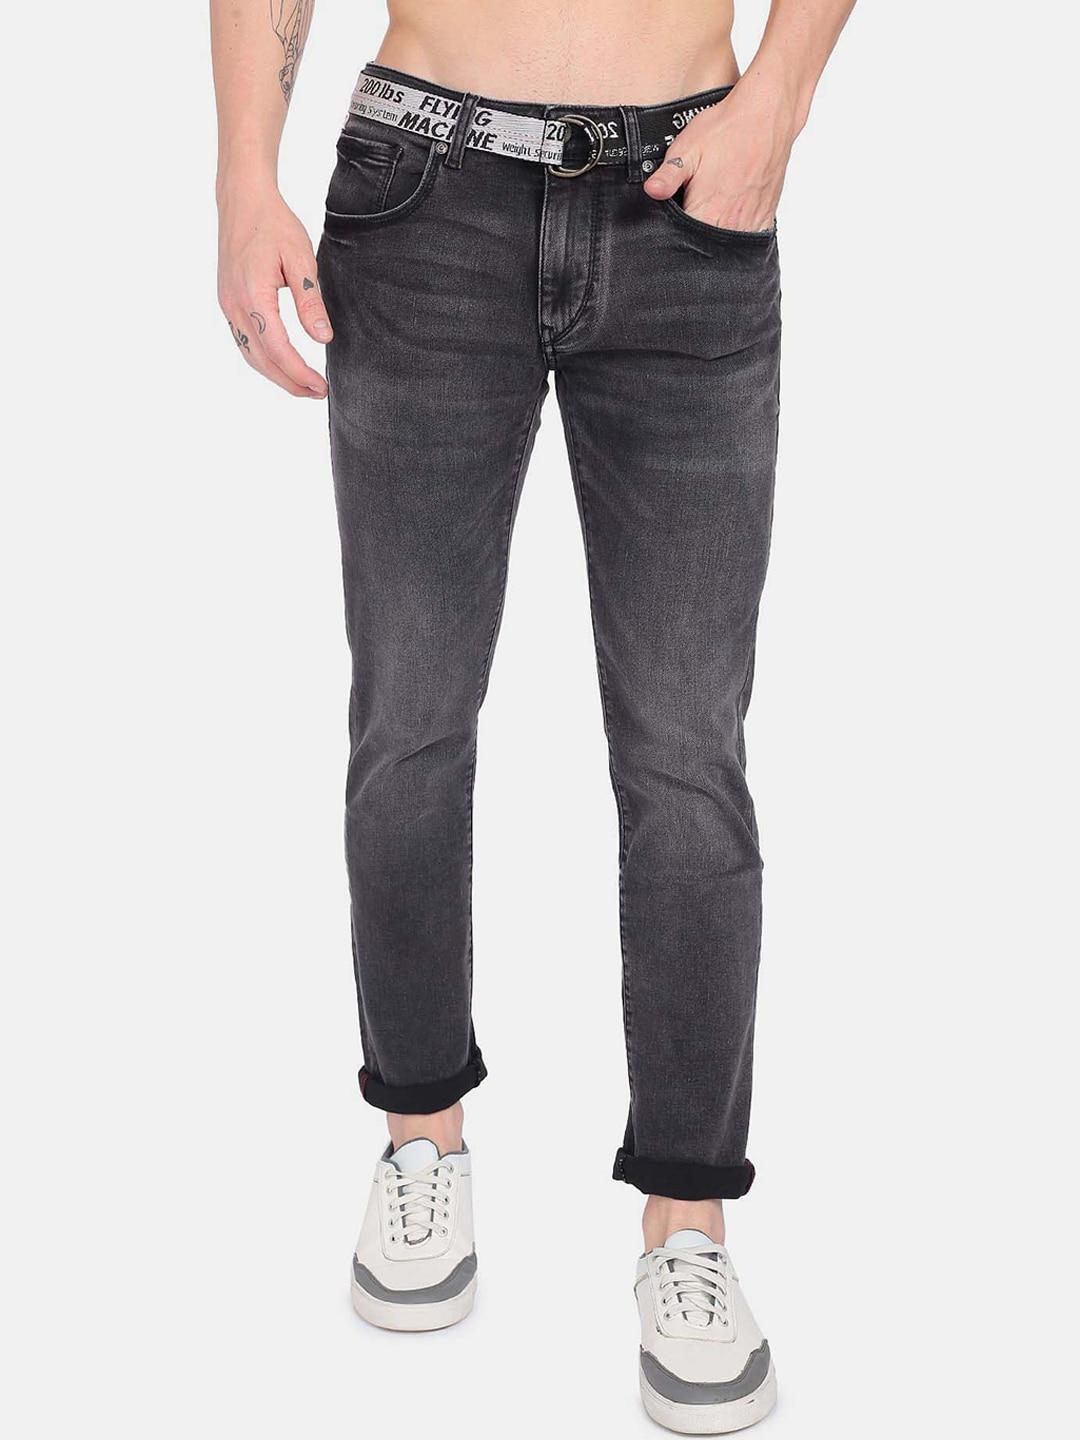 flying-machine-men-mid-rise-light-fade-jeans